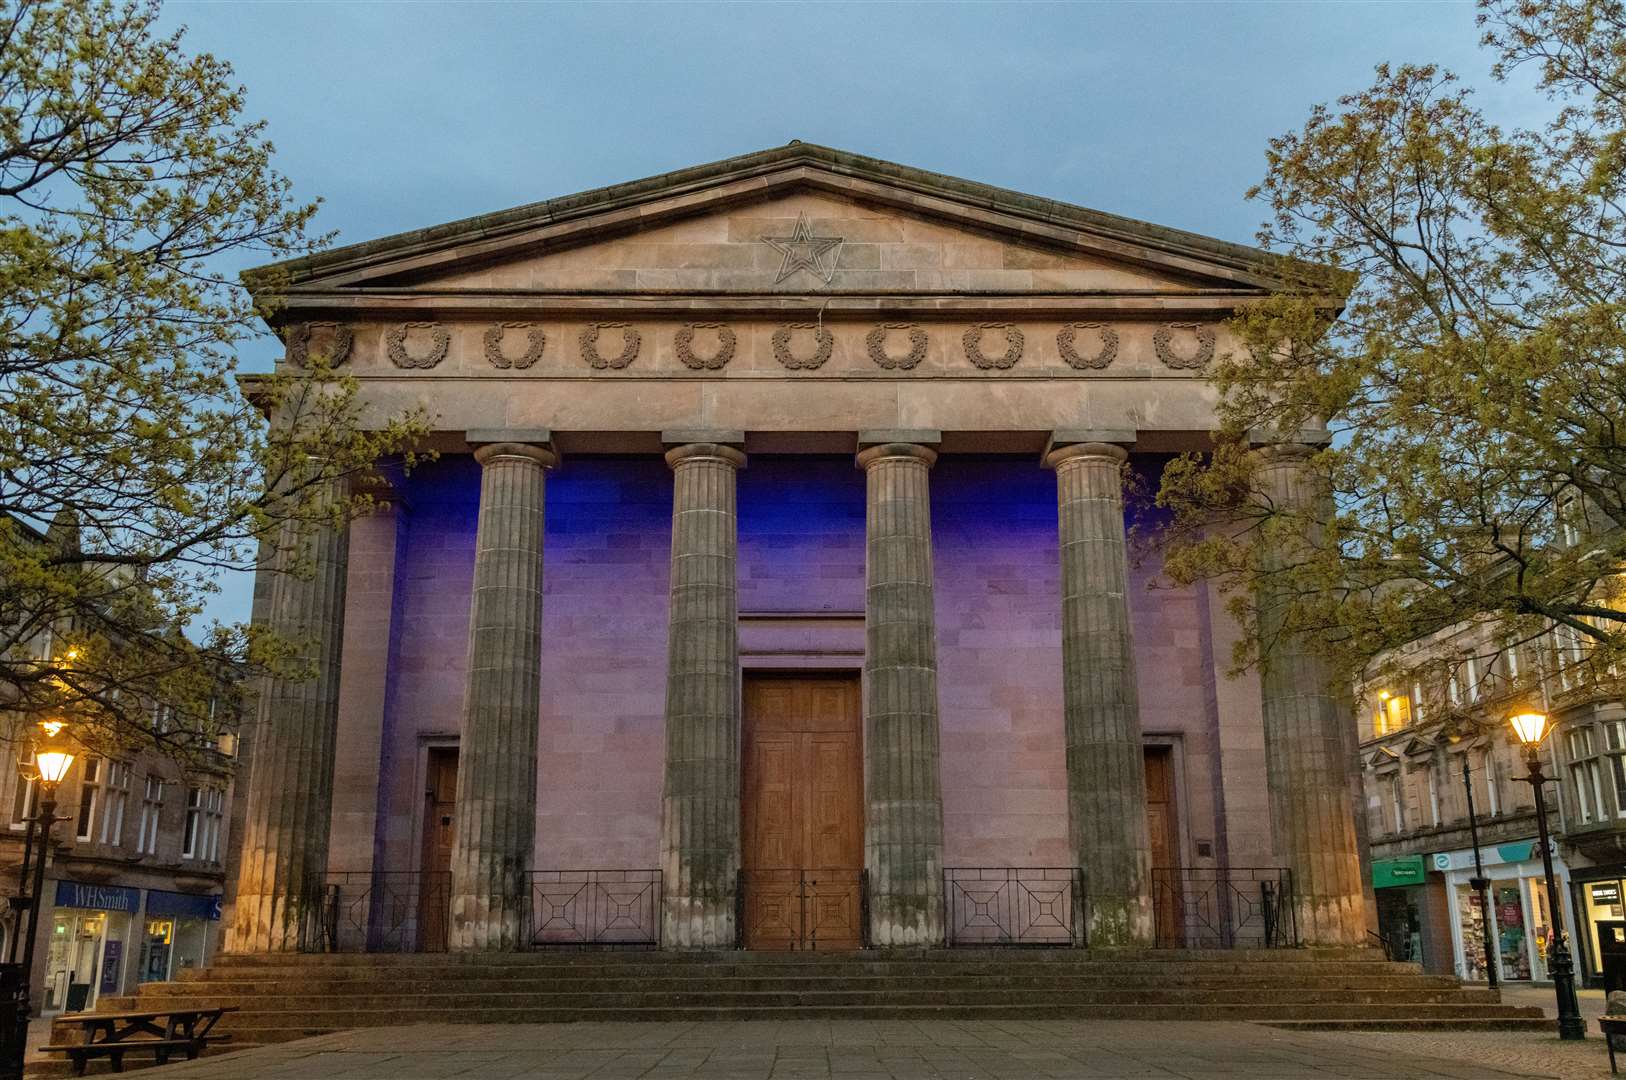 St Giles Church of Scotland in Elgin was lit blue to mark World Parkinson's Day on Thursday, April 11…Picture: Beth Taylor